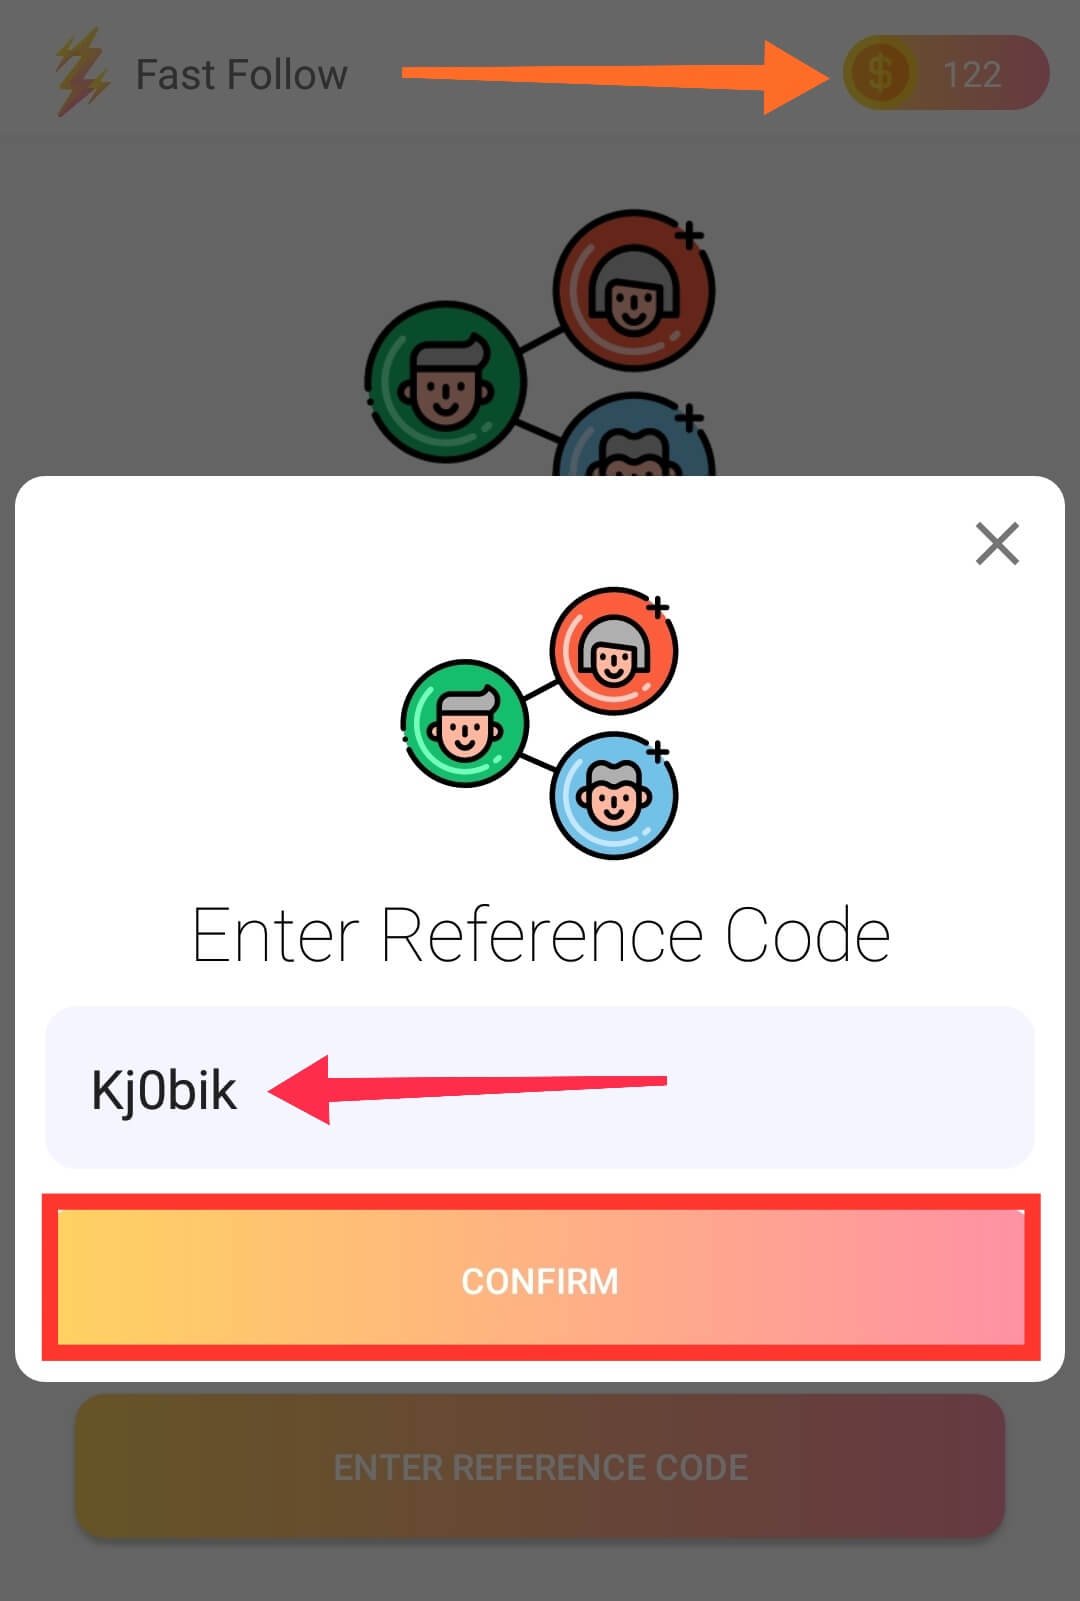 FastFollow App Reference Code